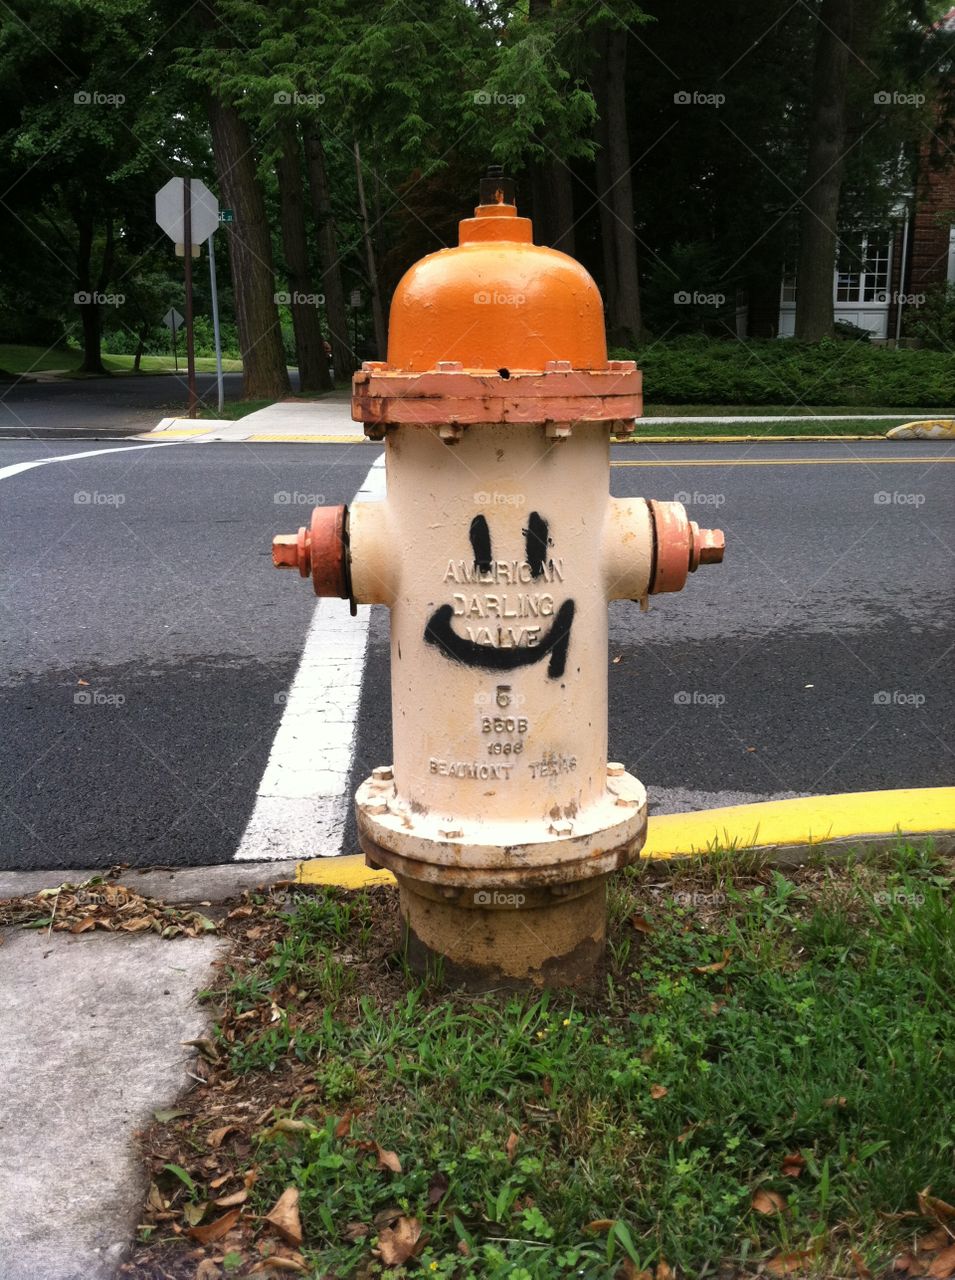 Even fire hydrants can smile